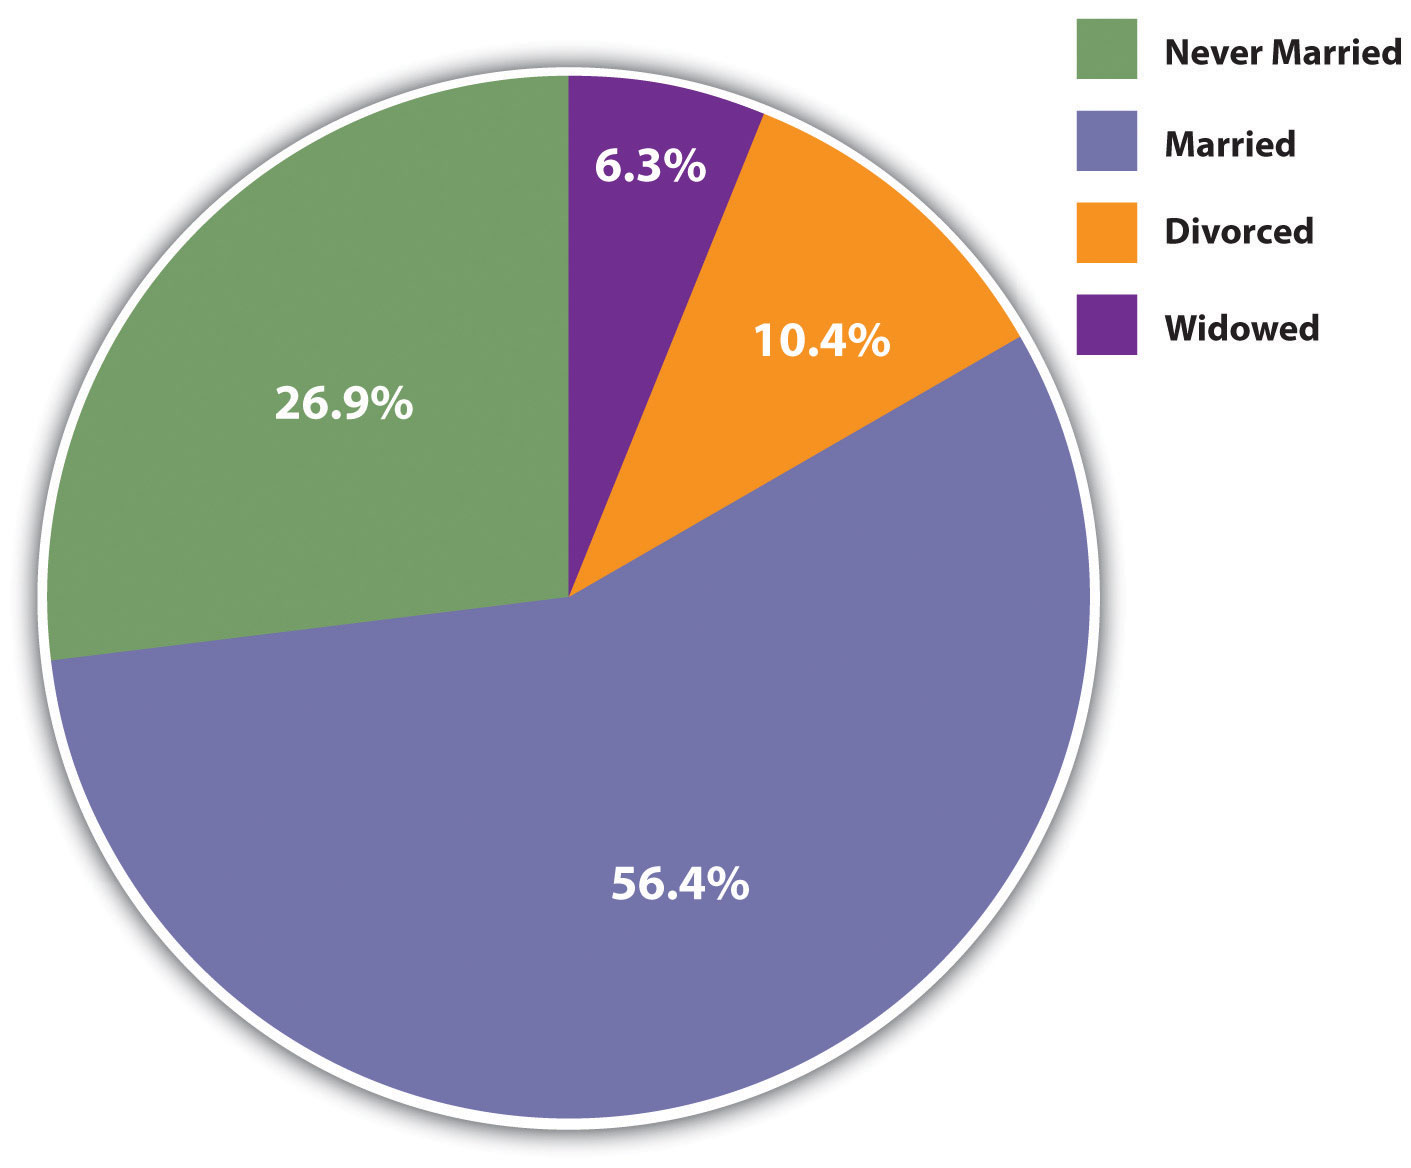 A pie graph showing the marital status of the US population 18 years of age or older. 56.4% are married, 26.9% have never been married, 10.4% are divorced, and 6.3% are widowed